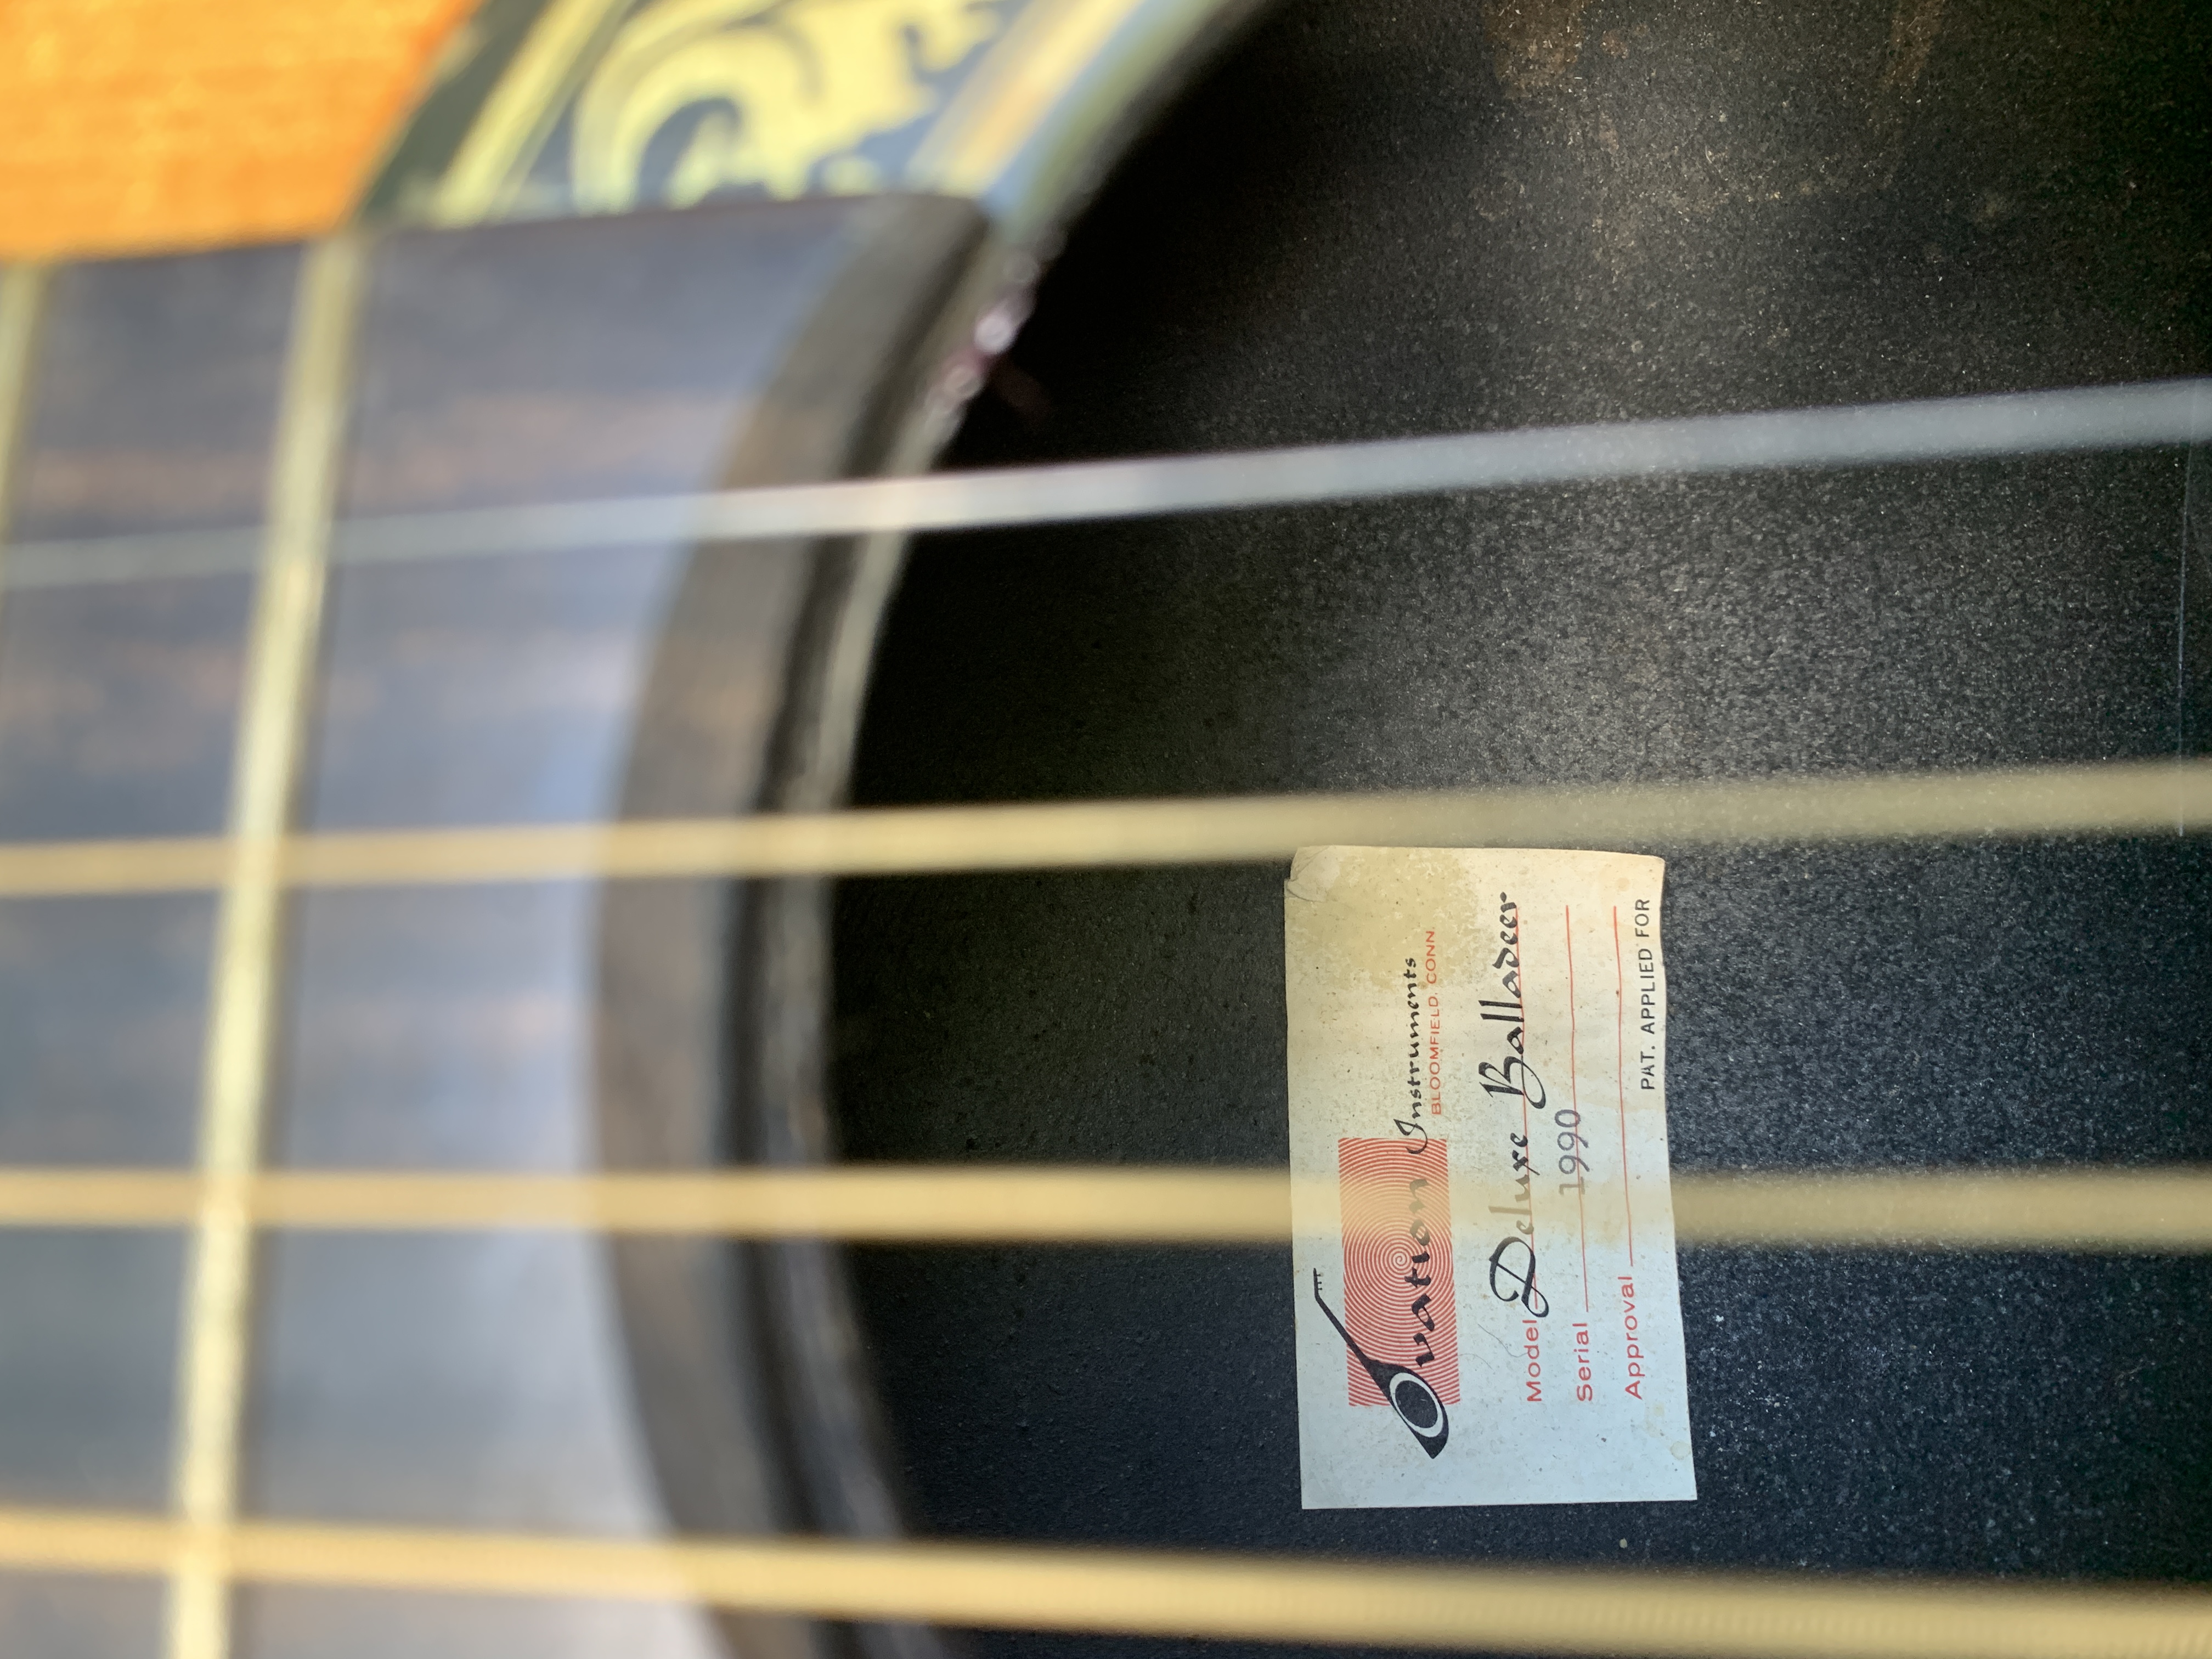 How to read ovation guitar serial numbers